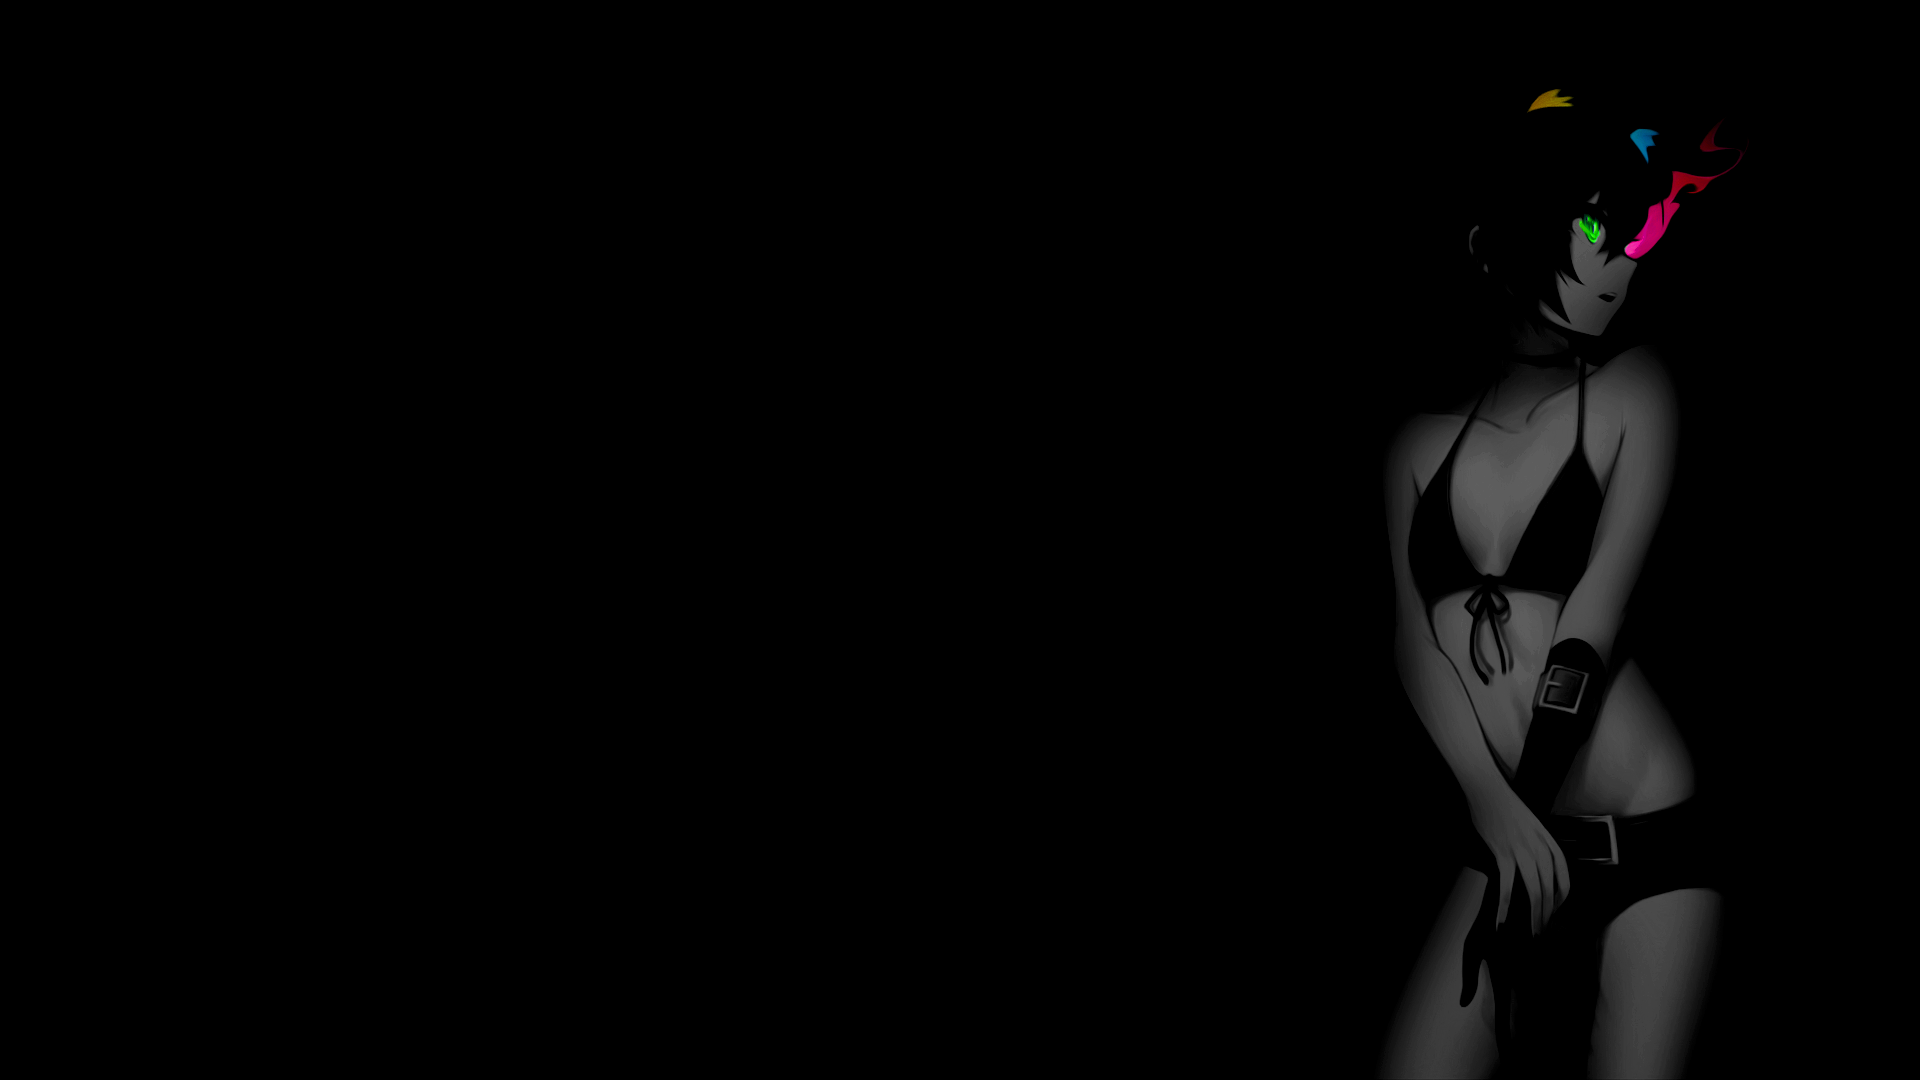 Selective Coloring Anime Girls Monochrome Simple Background Black Background Black Rock Shooter 1920x1080